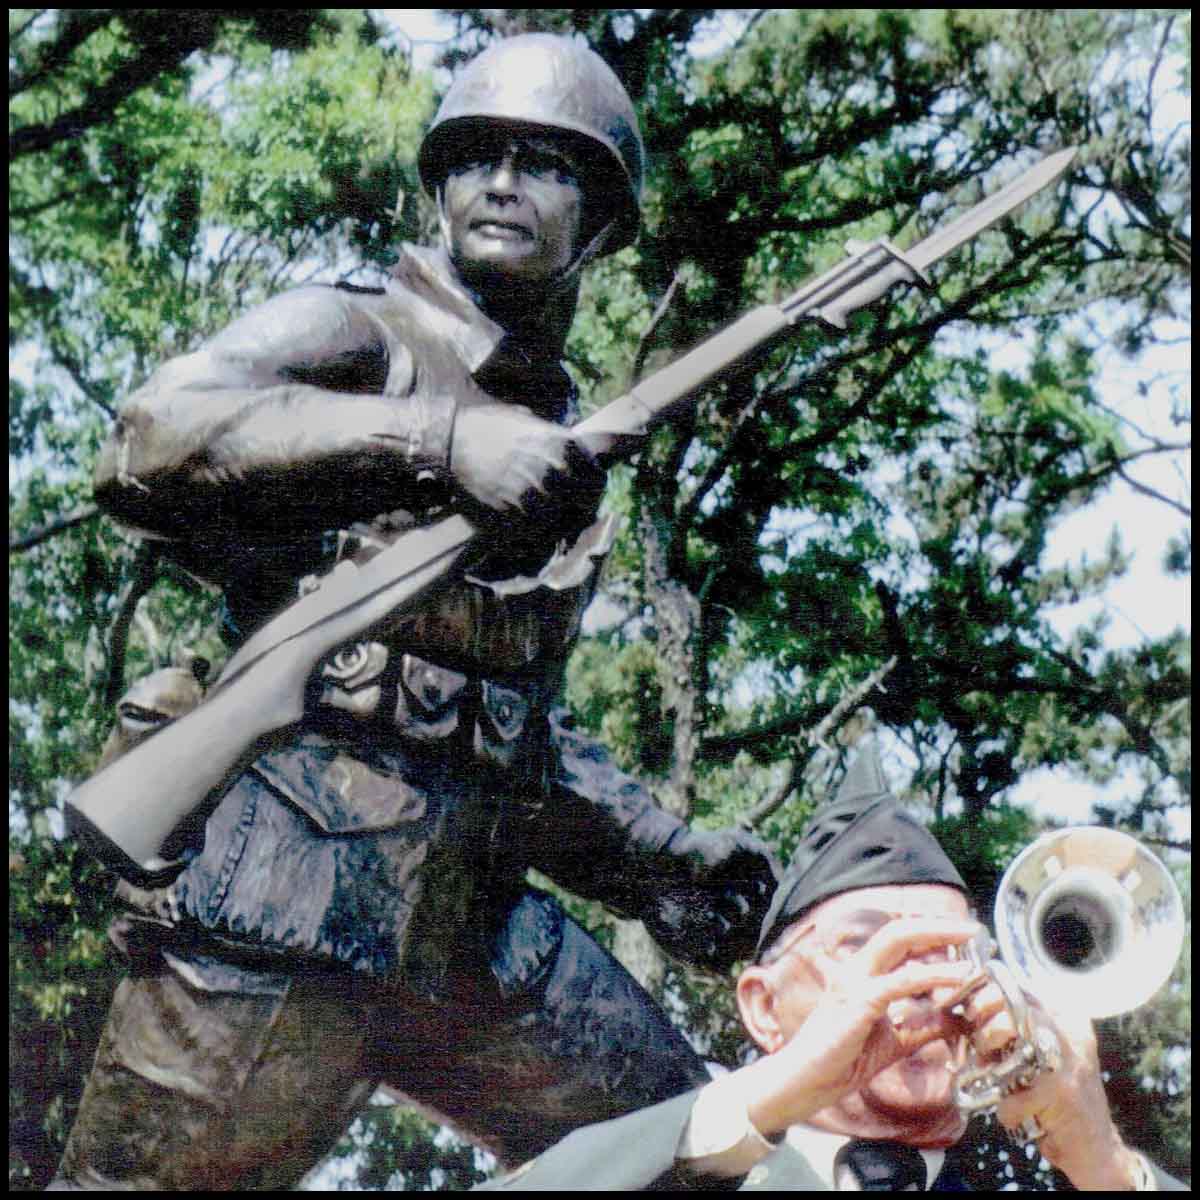 closeup photo of bronze-colored sculpture of soldier holding rifle in action on incline with trees behind and veteran in dress uniform in front playing trumpet